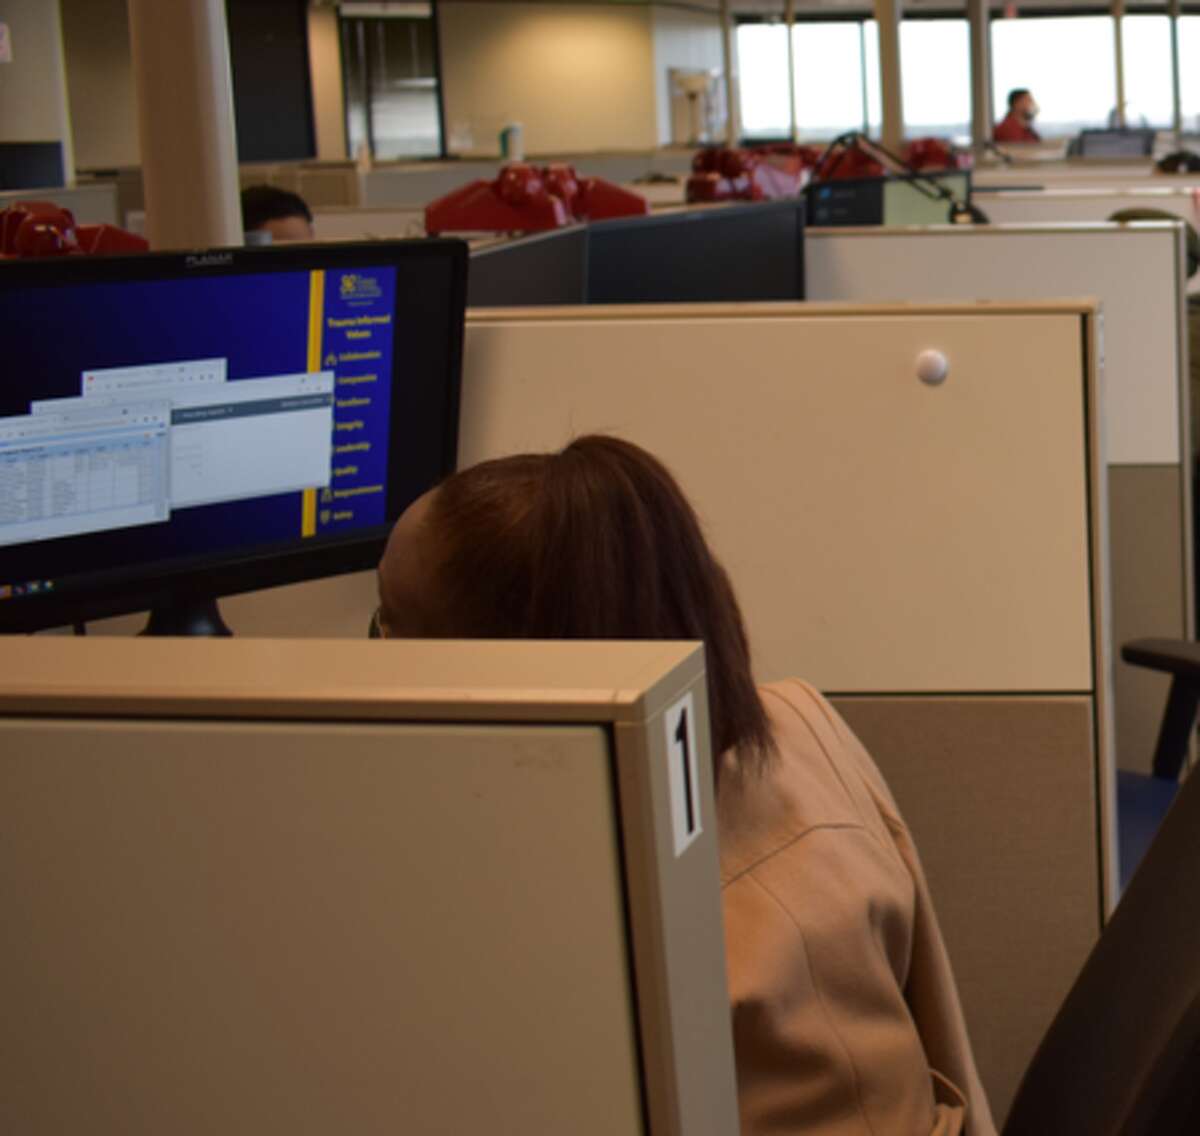 The Harris Center for Mental Health and IDD serves as a call center for the 988 Suicide & Crisis Lifeline, which has seen a surge in calls since its launch in July 2022. 